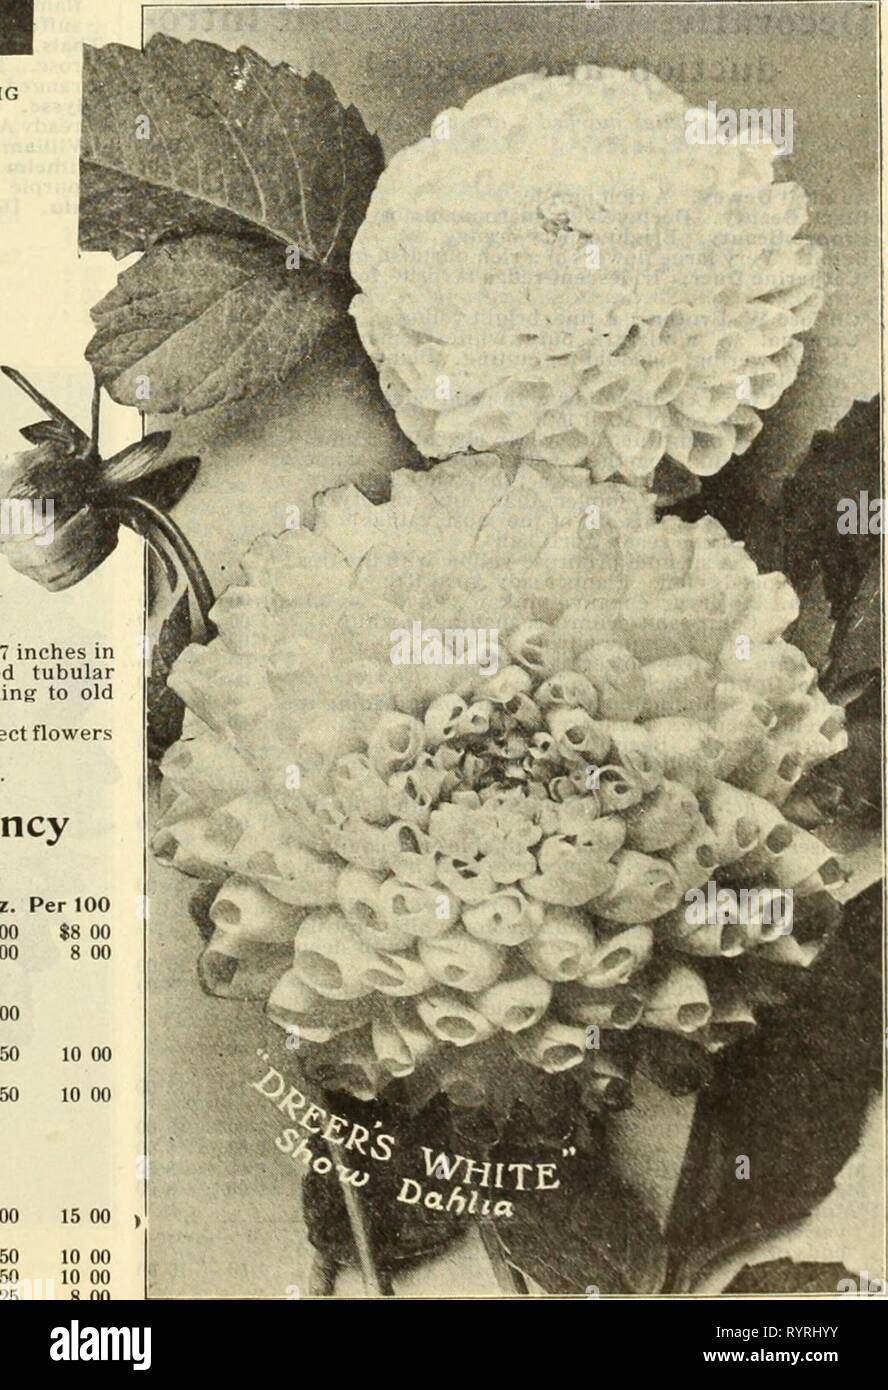 Dreer's wholesale price list of Dreer's wholesale price list of seeds plants and bulbs for florists : fertilizers, insecticides, tools and sundries . dreerswholesalep1912henr 1 Year: 1912  Double Show and Fancy Dahlias—Continued. Per doz. Per 100 Frank Smith. Intense maroon ; each petal tipped »white tl 50 $10 00 dettysburg. Large, bright, rich scarlet ..... l 50 10 00 *Orand Duke Alexis. Large, massive flowers, ivory- white, with a faint tinge of rose at the extremities of the petals 1 50 Hero. Aniline-red of fine shape 1 50 Isis (New). Flower of immense size, orange-scarlet suffused with car Stock Photo